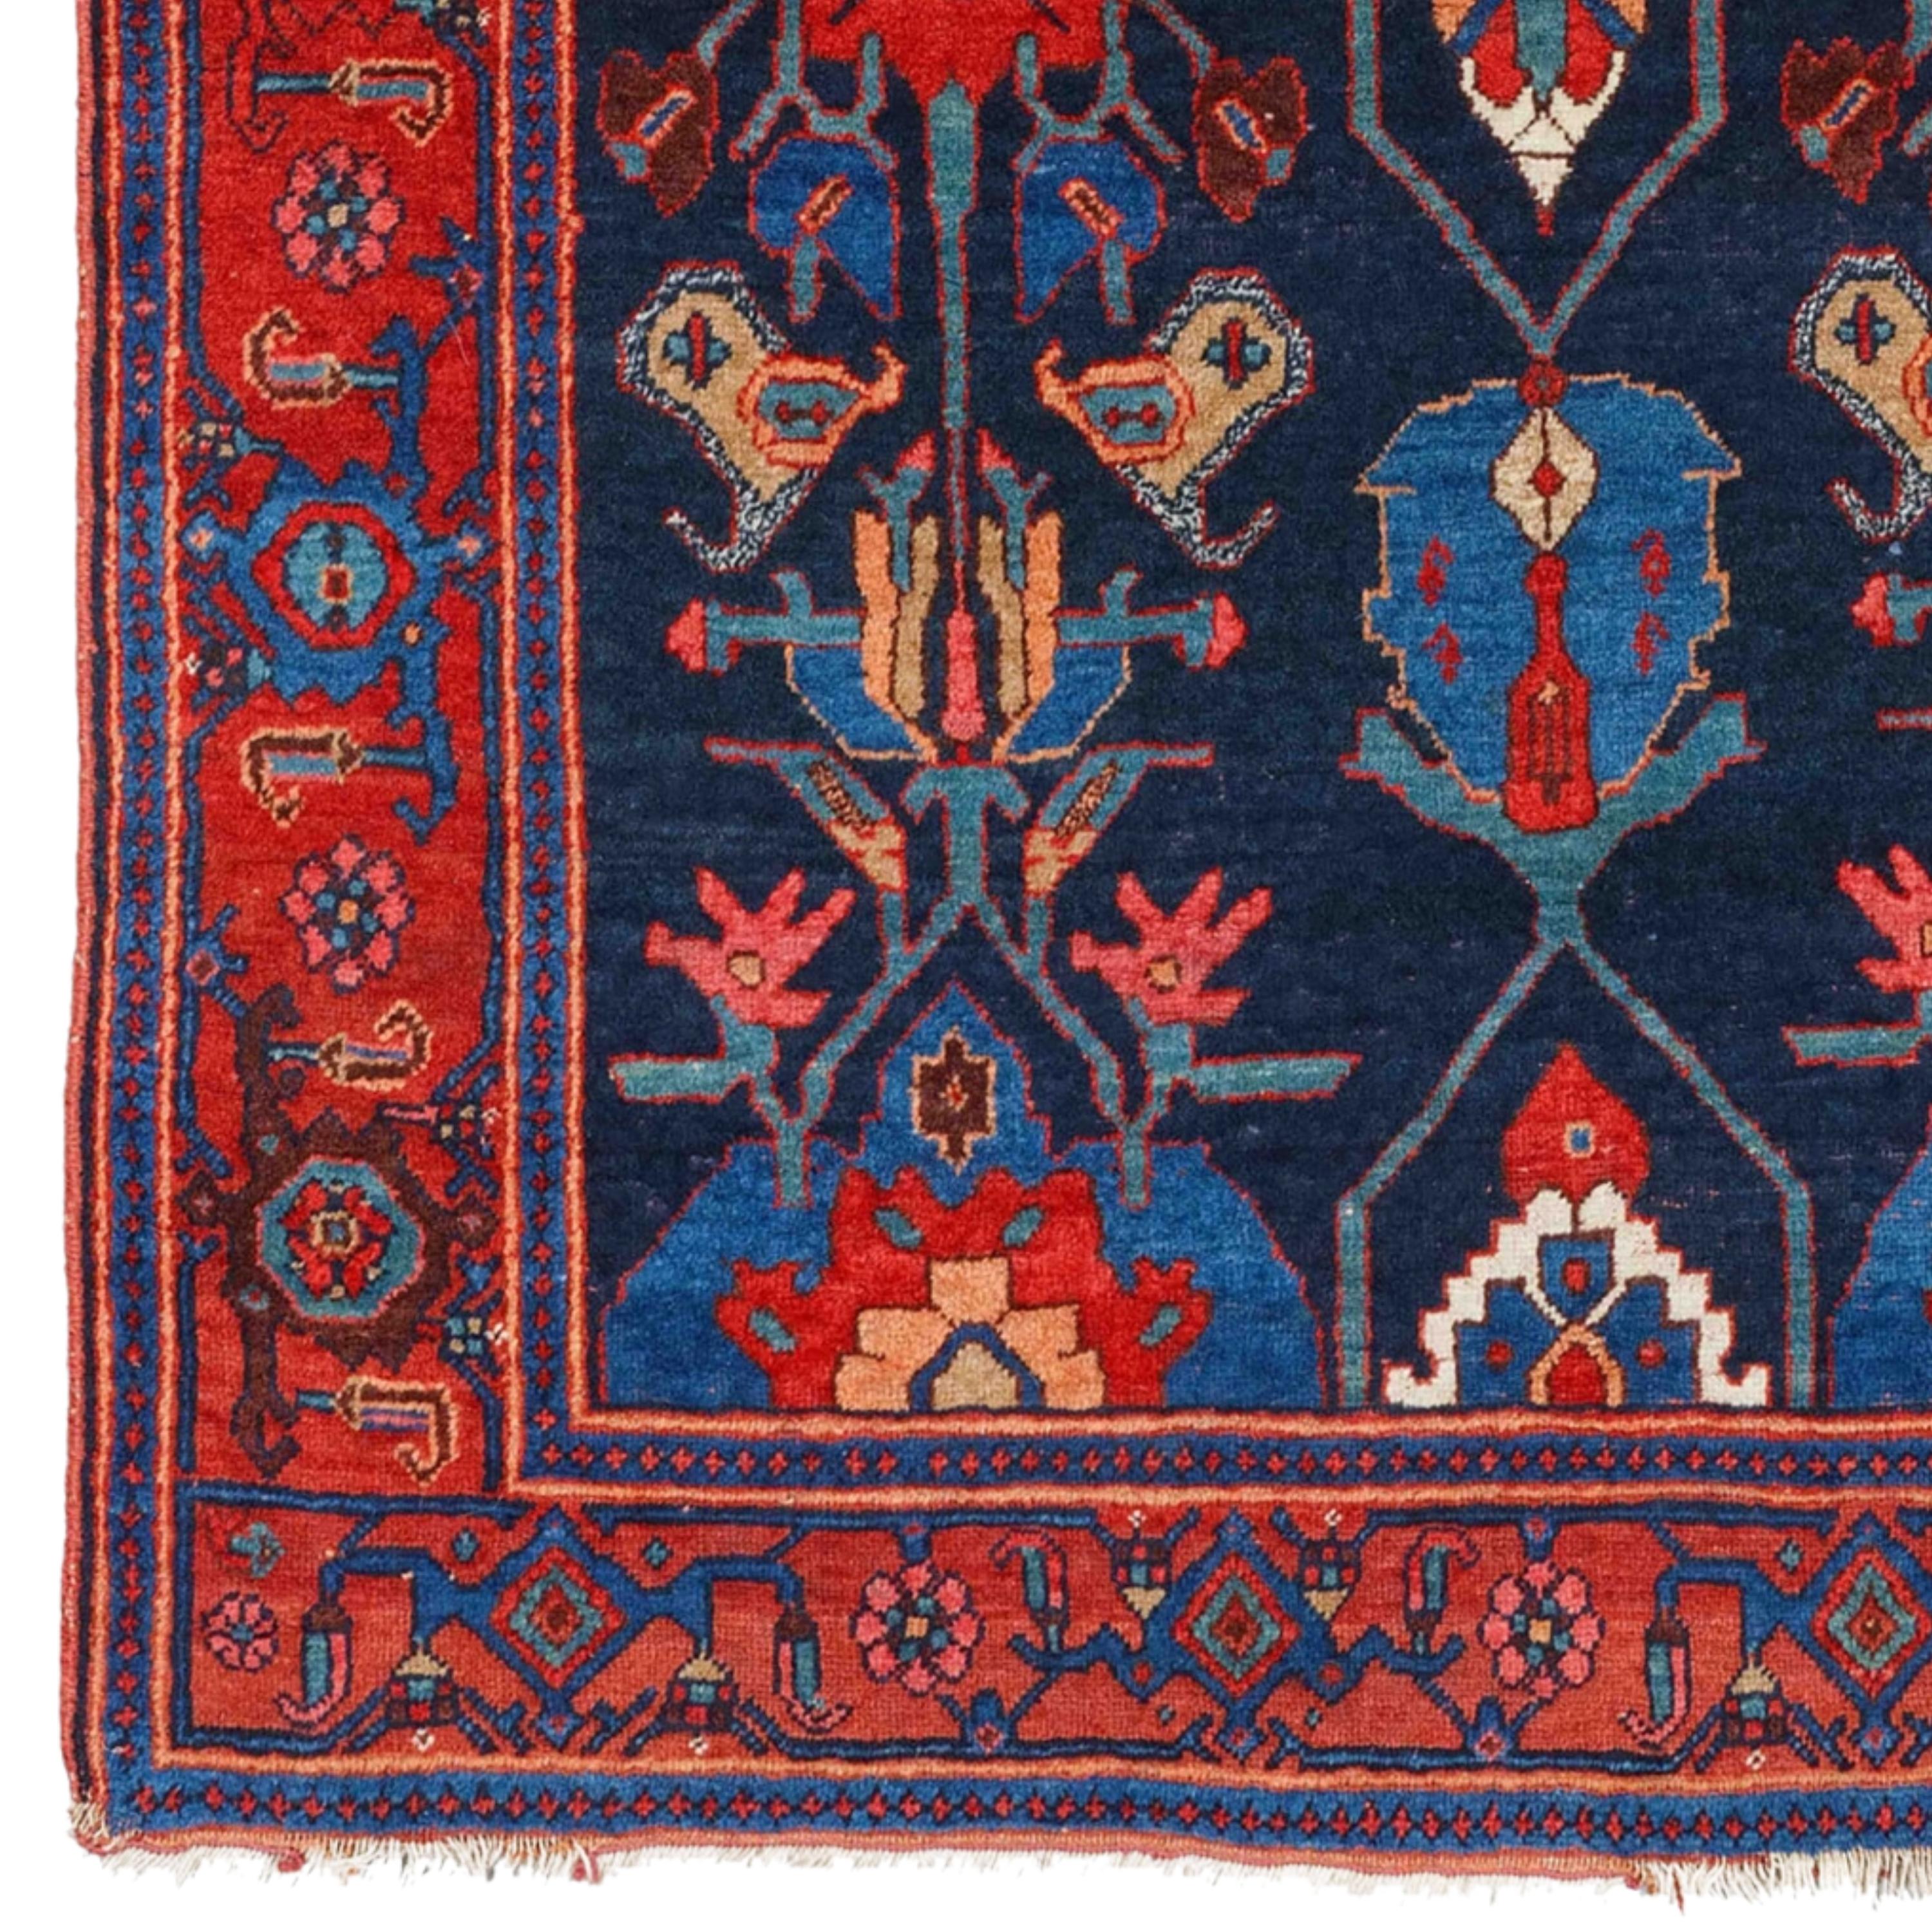 Dated Bidjar Rug in Good Condition

This extraordinary carpet will fascinate you with its intricate designs and vibrant colors that reflect the rich history and craftsmanship of the period. Each stitch tells the story of skilled craftsmen who